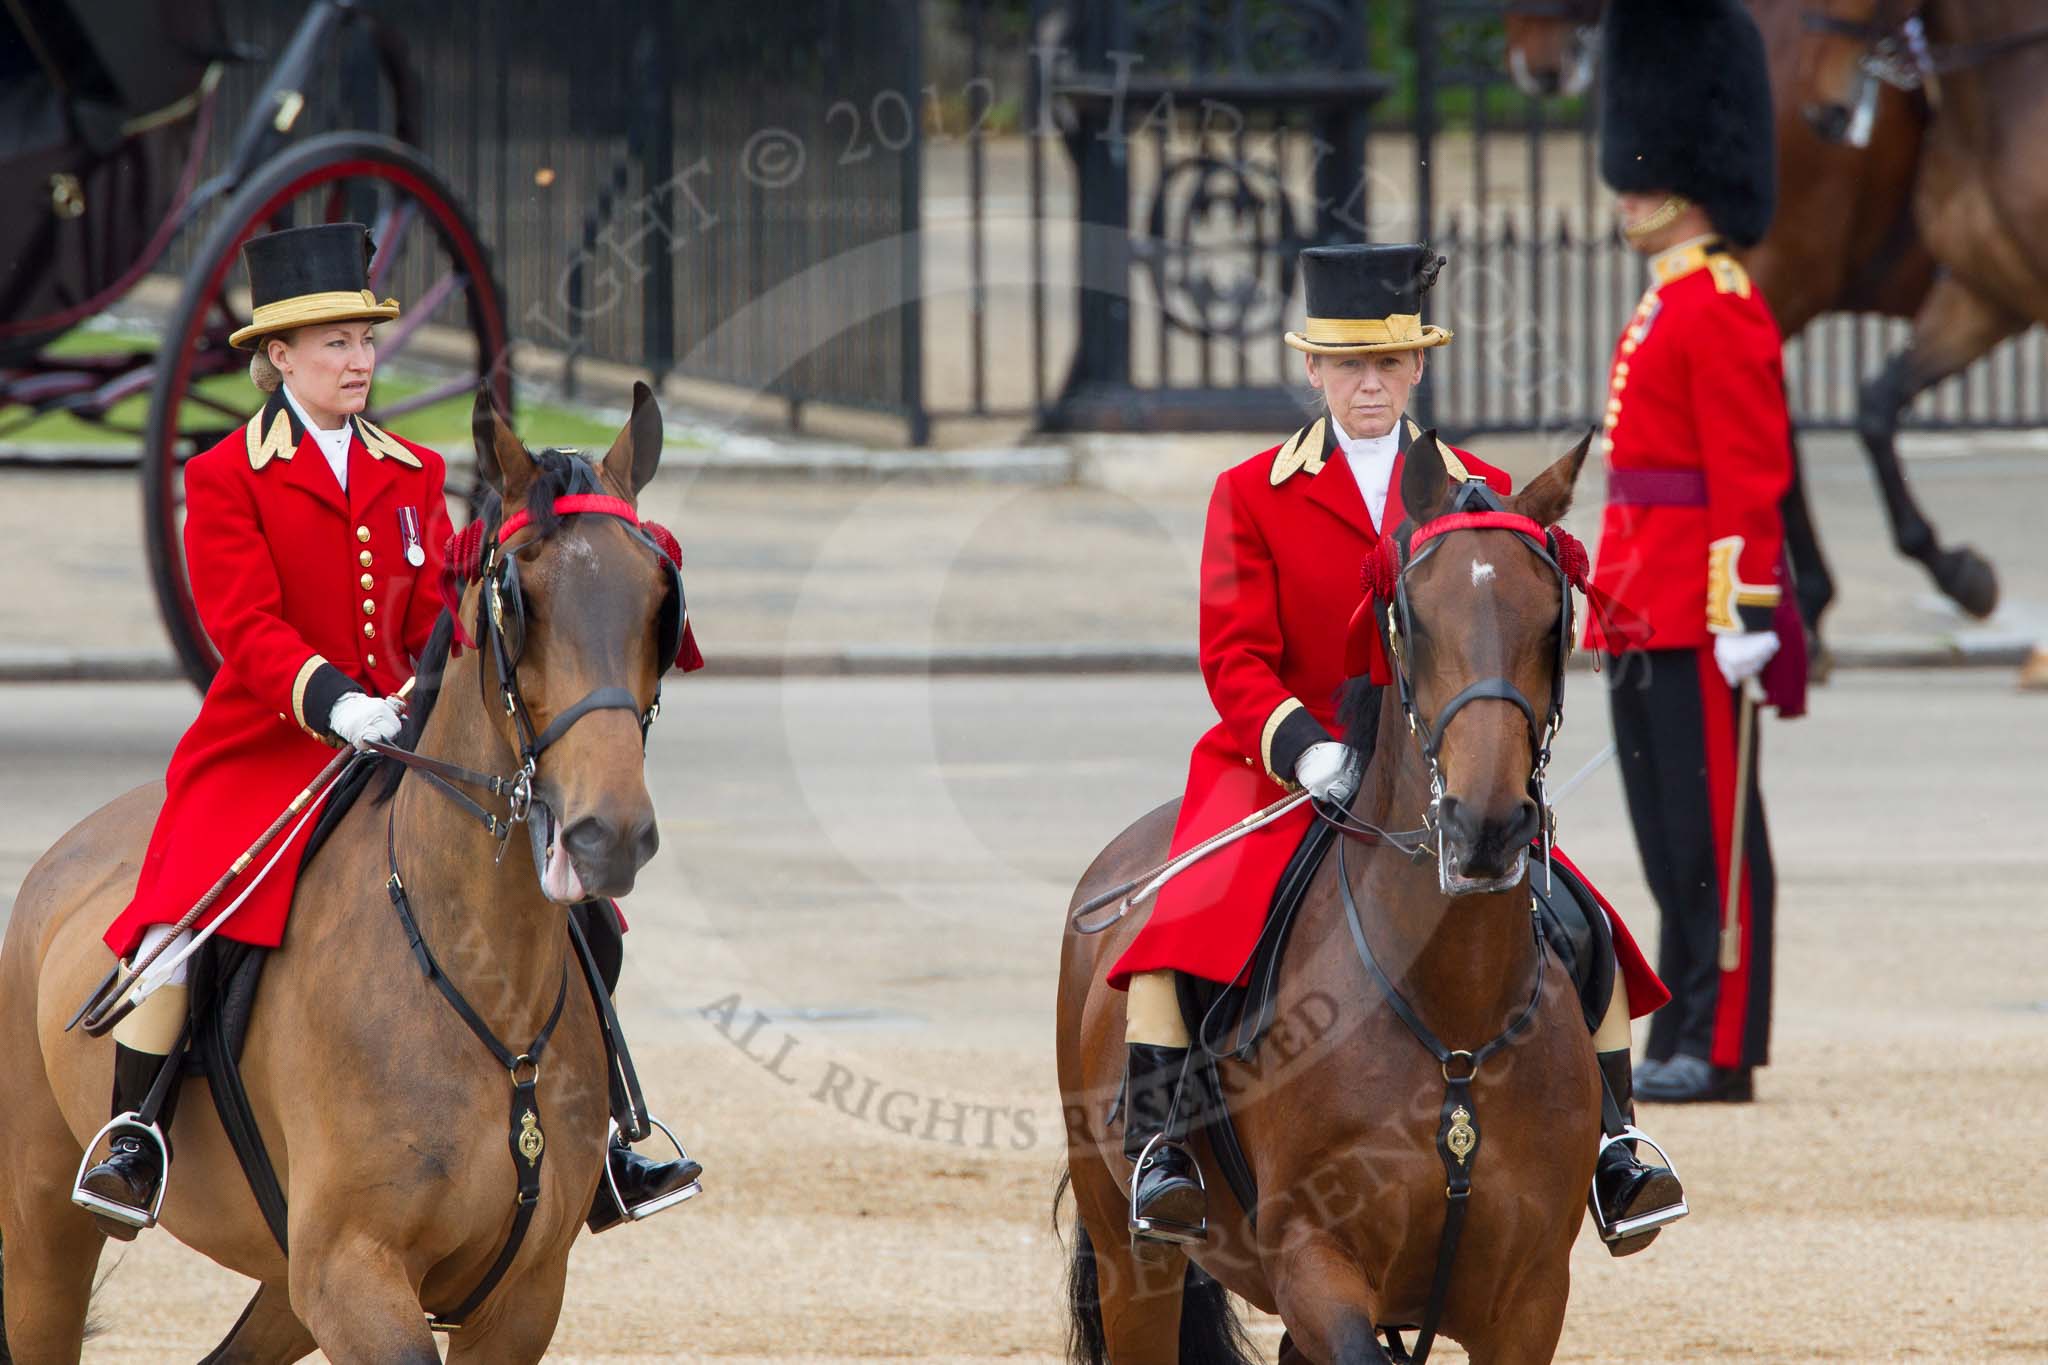 The Colonel's Review 2012: The arrival of the first members of the Royal family. leading the way two Liveried Grooms from the Royal Mews..
Horse Guards Parade, Westminster,
London SW1,

United Kingdom,
on 09 June 2012 at 10:48, image #119